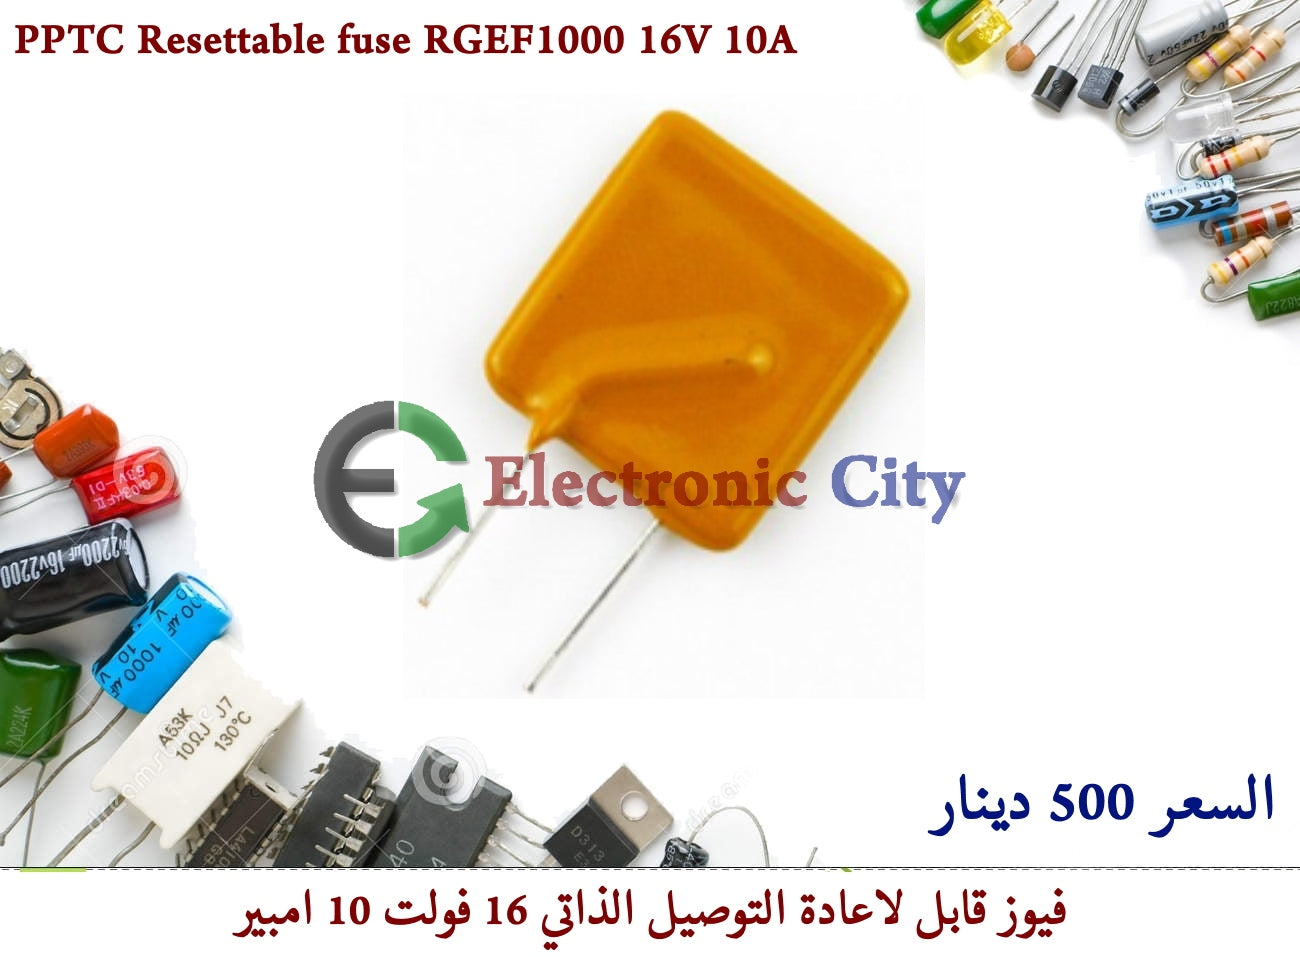 PPTC Resettable fuse RGEF1000 16V 10A